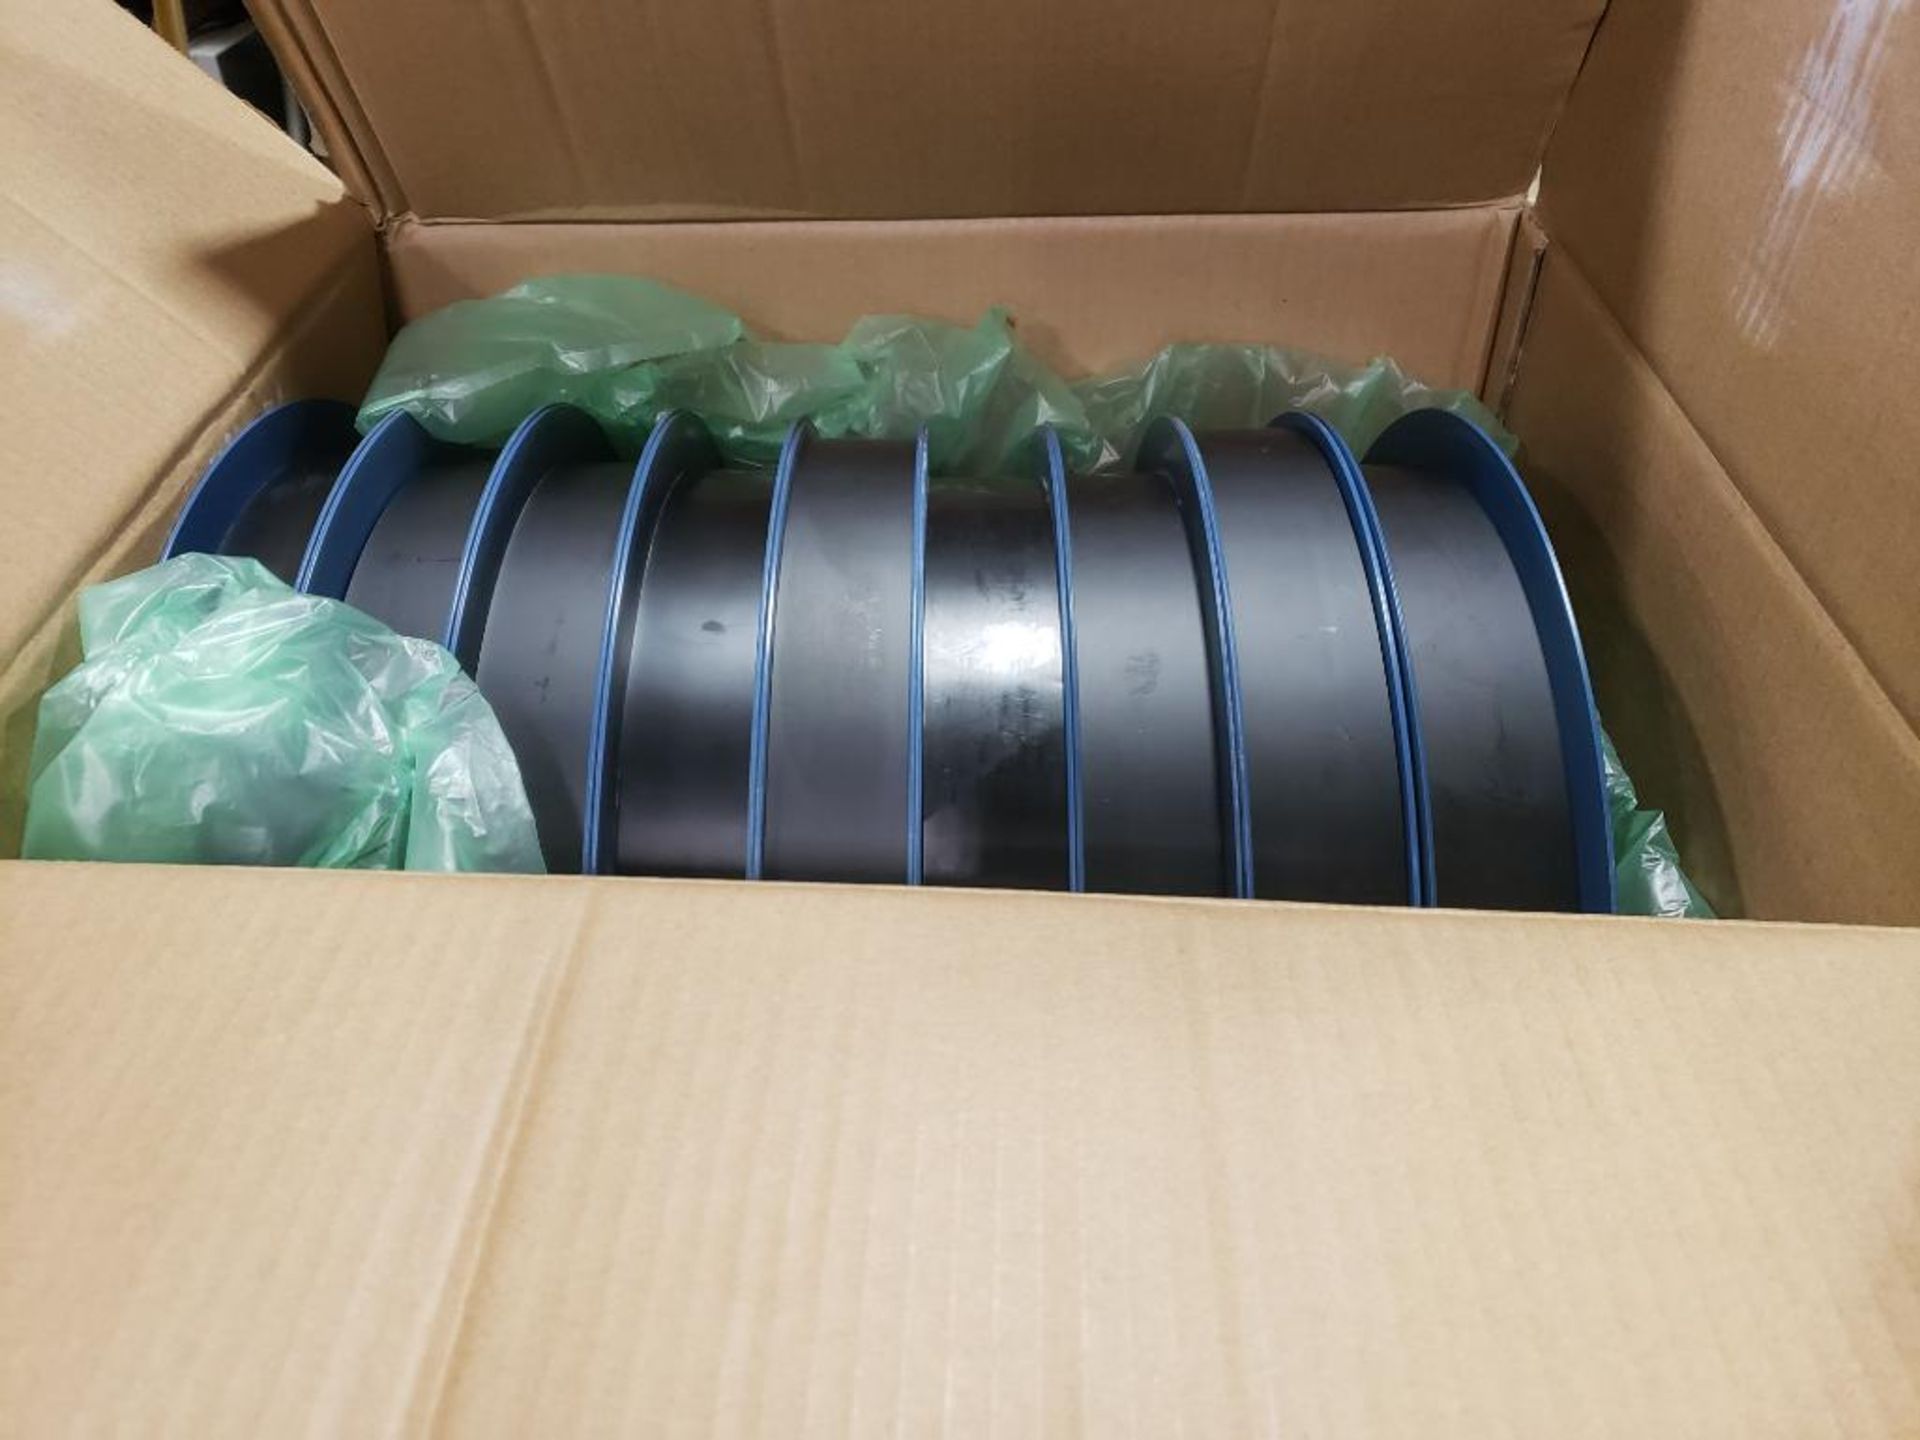 Qty 9000 - TE Connectivity part number 2213629-3. (4 bulk boxes of 9 reels) - Image 11 of 12